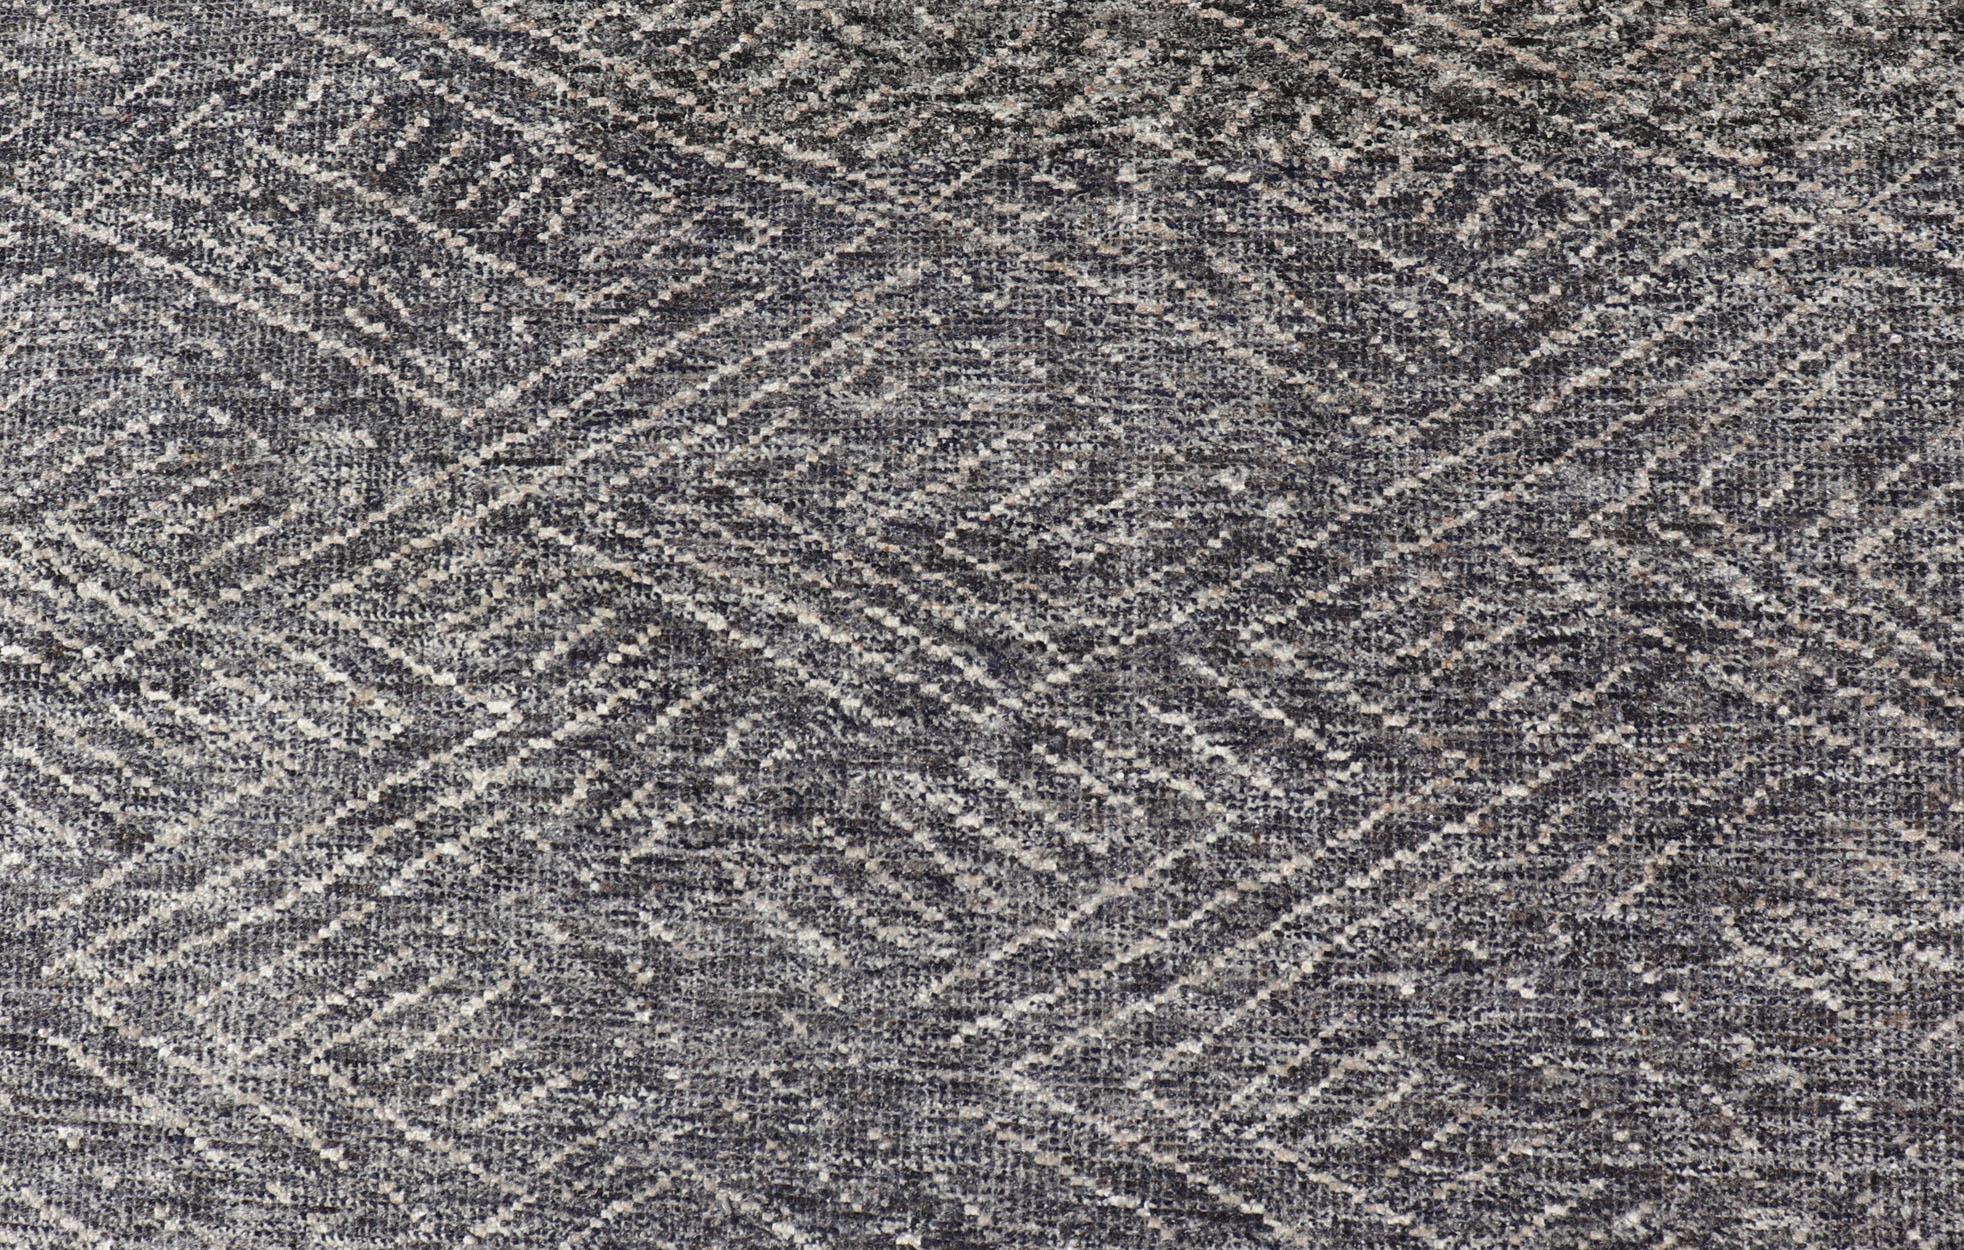 Measures 6 x 9 

This modern Indian area rug features an abstract design loosely resembling a crosshatch design. The entire rug is rendered in a charcoal and light cream. 

Country of Origin: India; Type: Modern, Minimal; Design: Abstract,